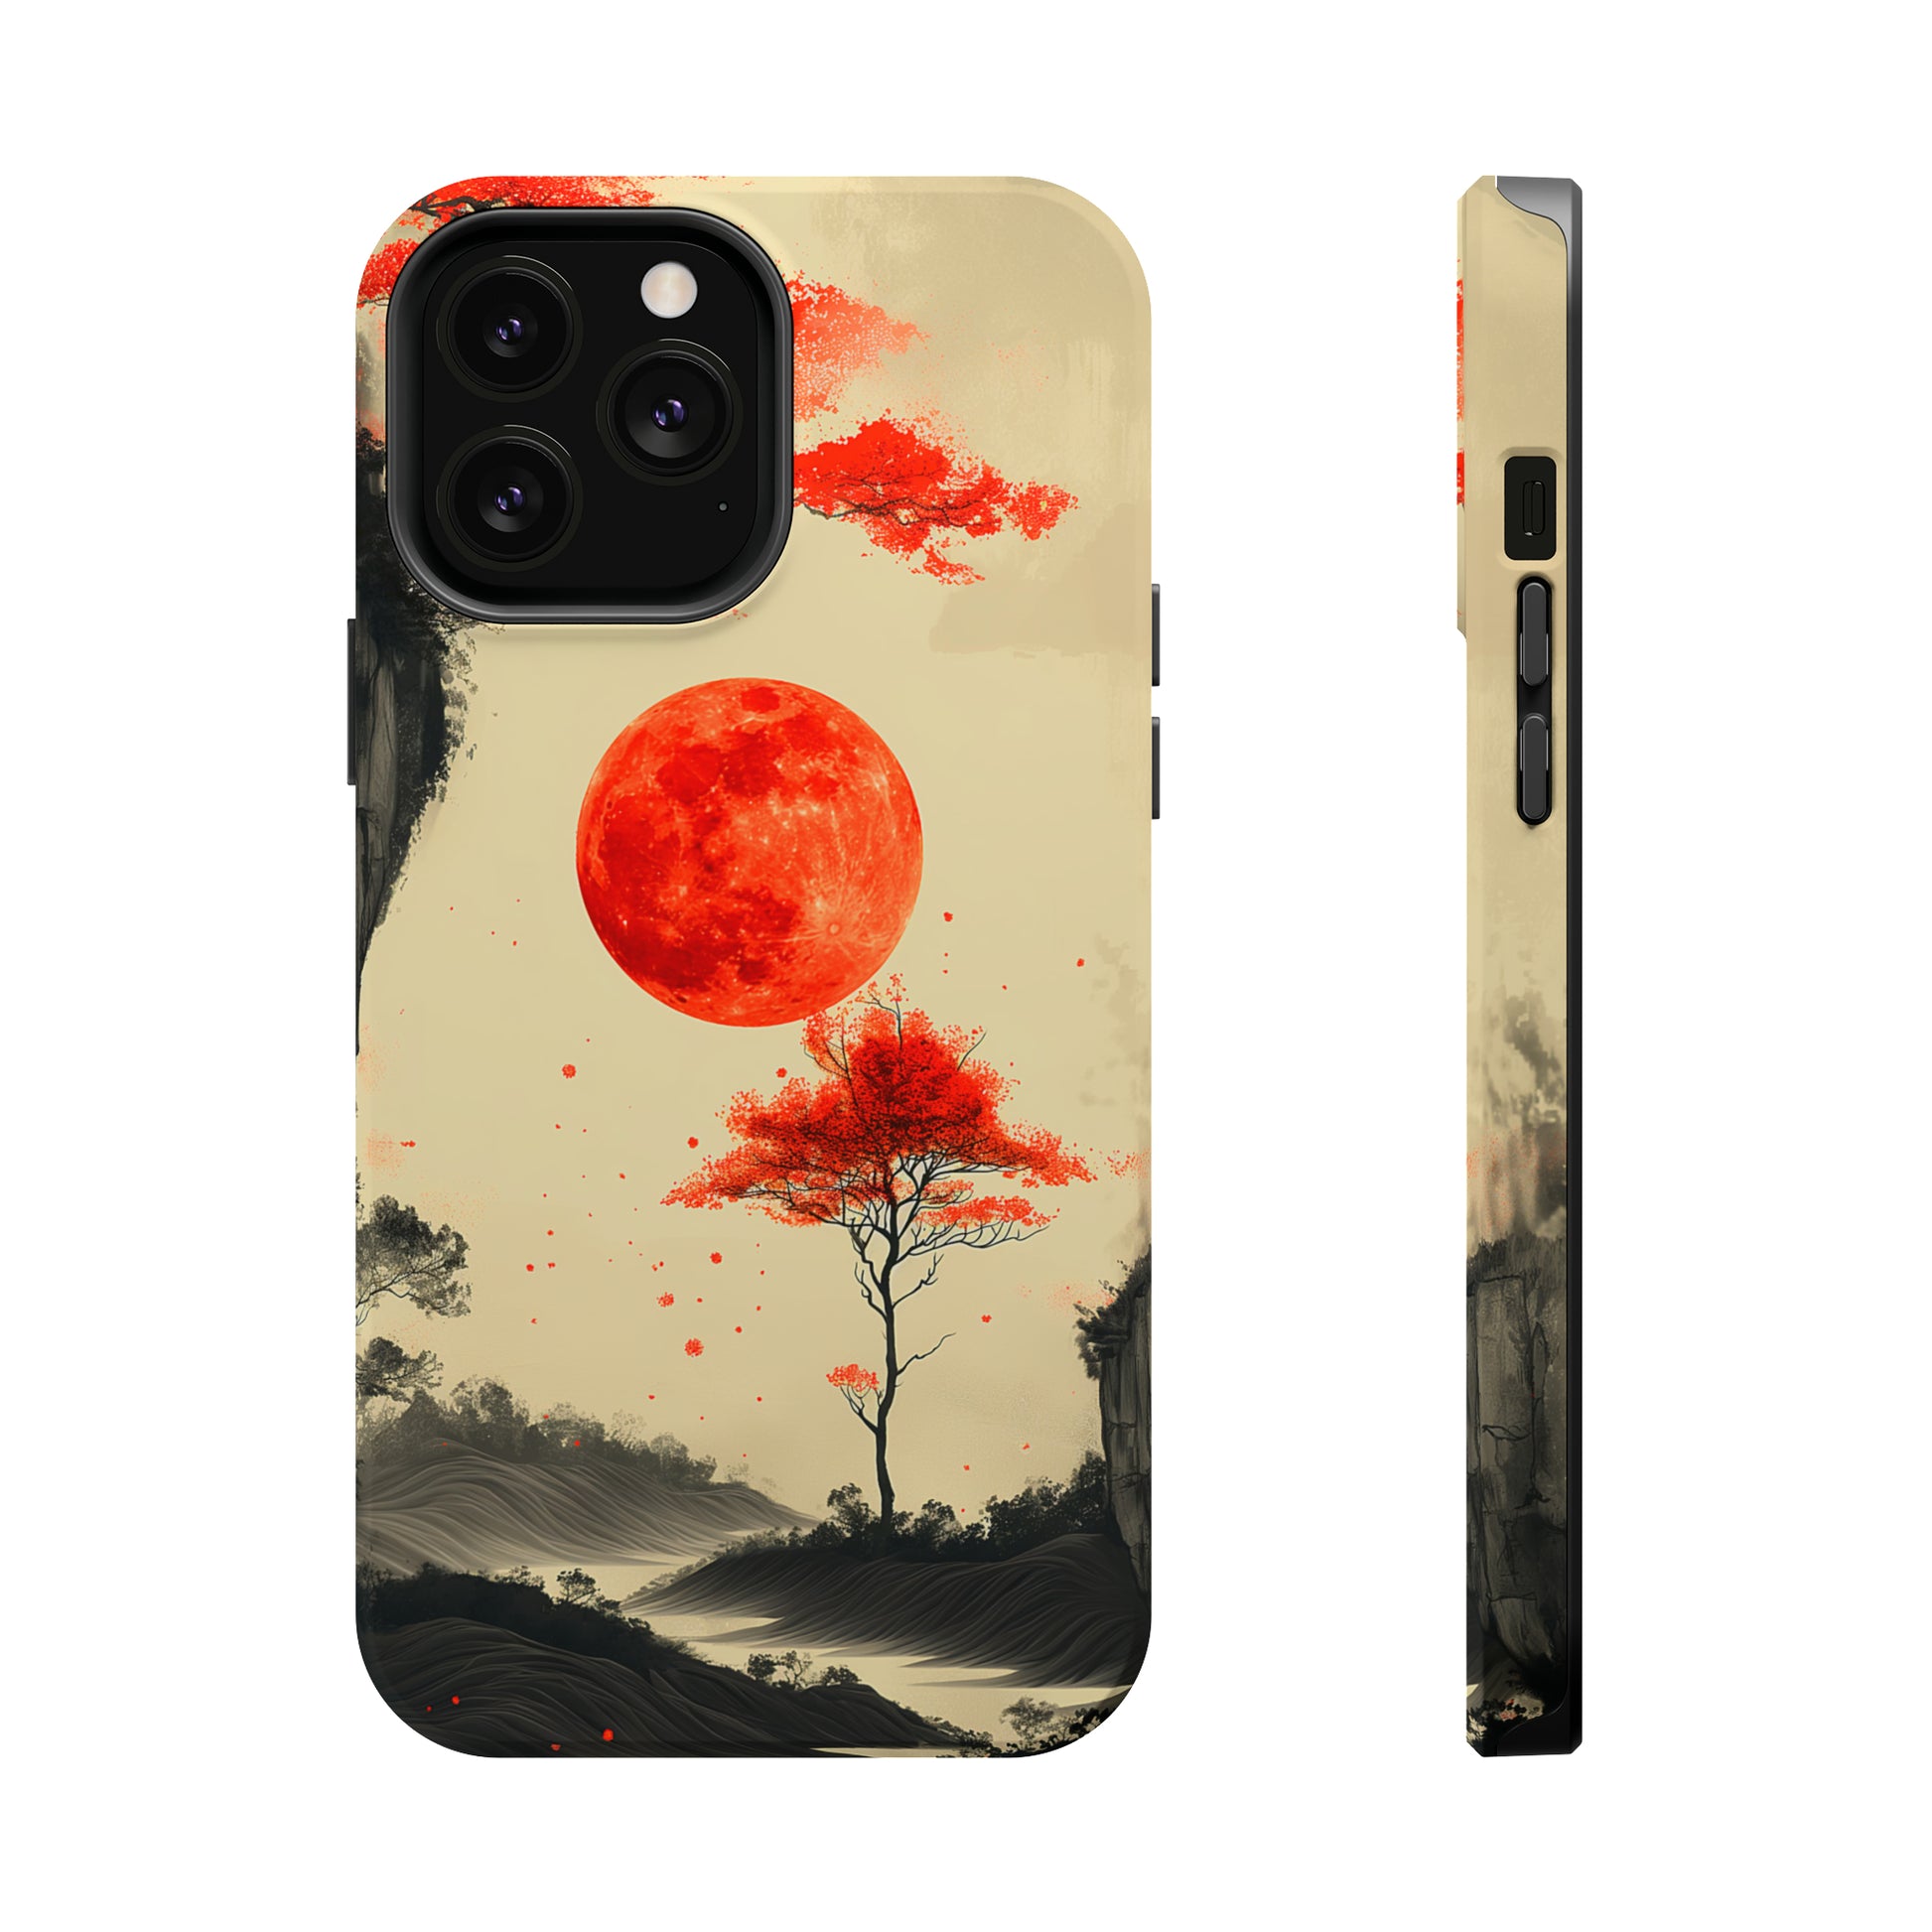 Scarlet Moonrise (iPhone MagSafe Case)Elevate your iPhone's style with Artistic scenery with red trees and large moon MagSafe Case, offering robust protection, MagSafe compatibility, and a choice of mattRimaGallery